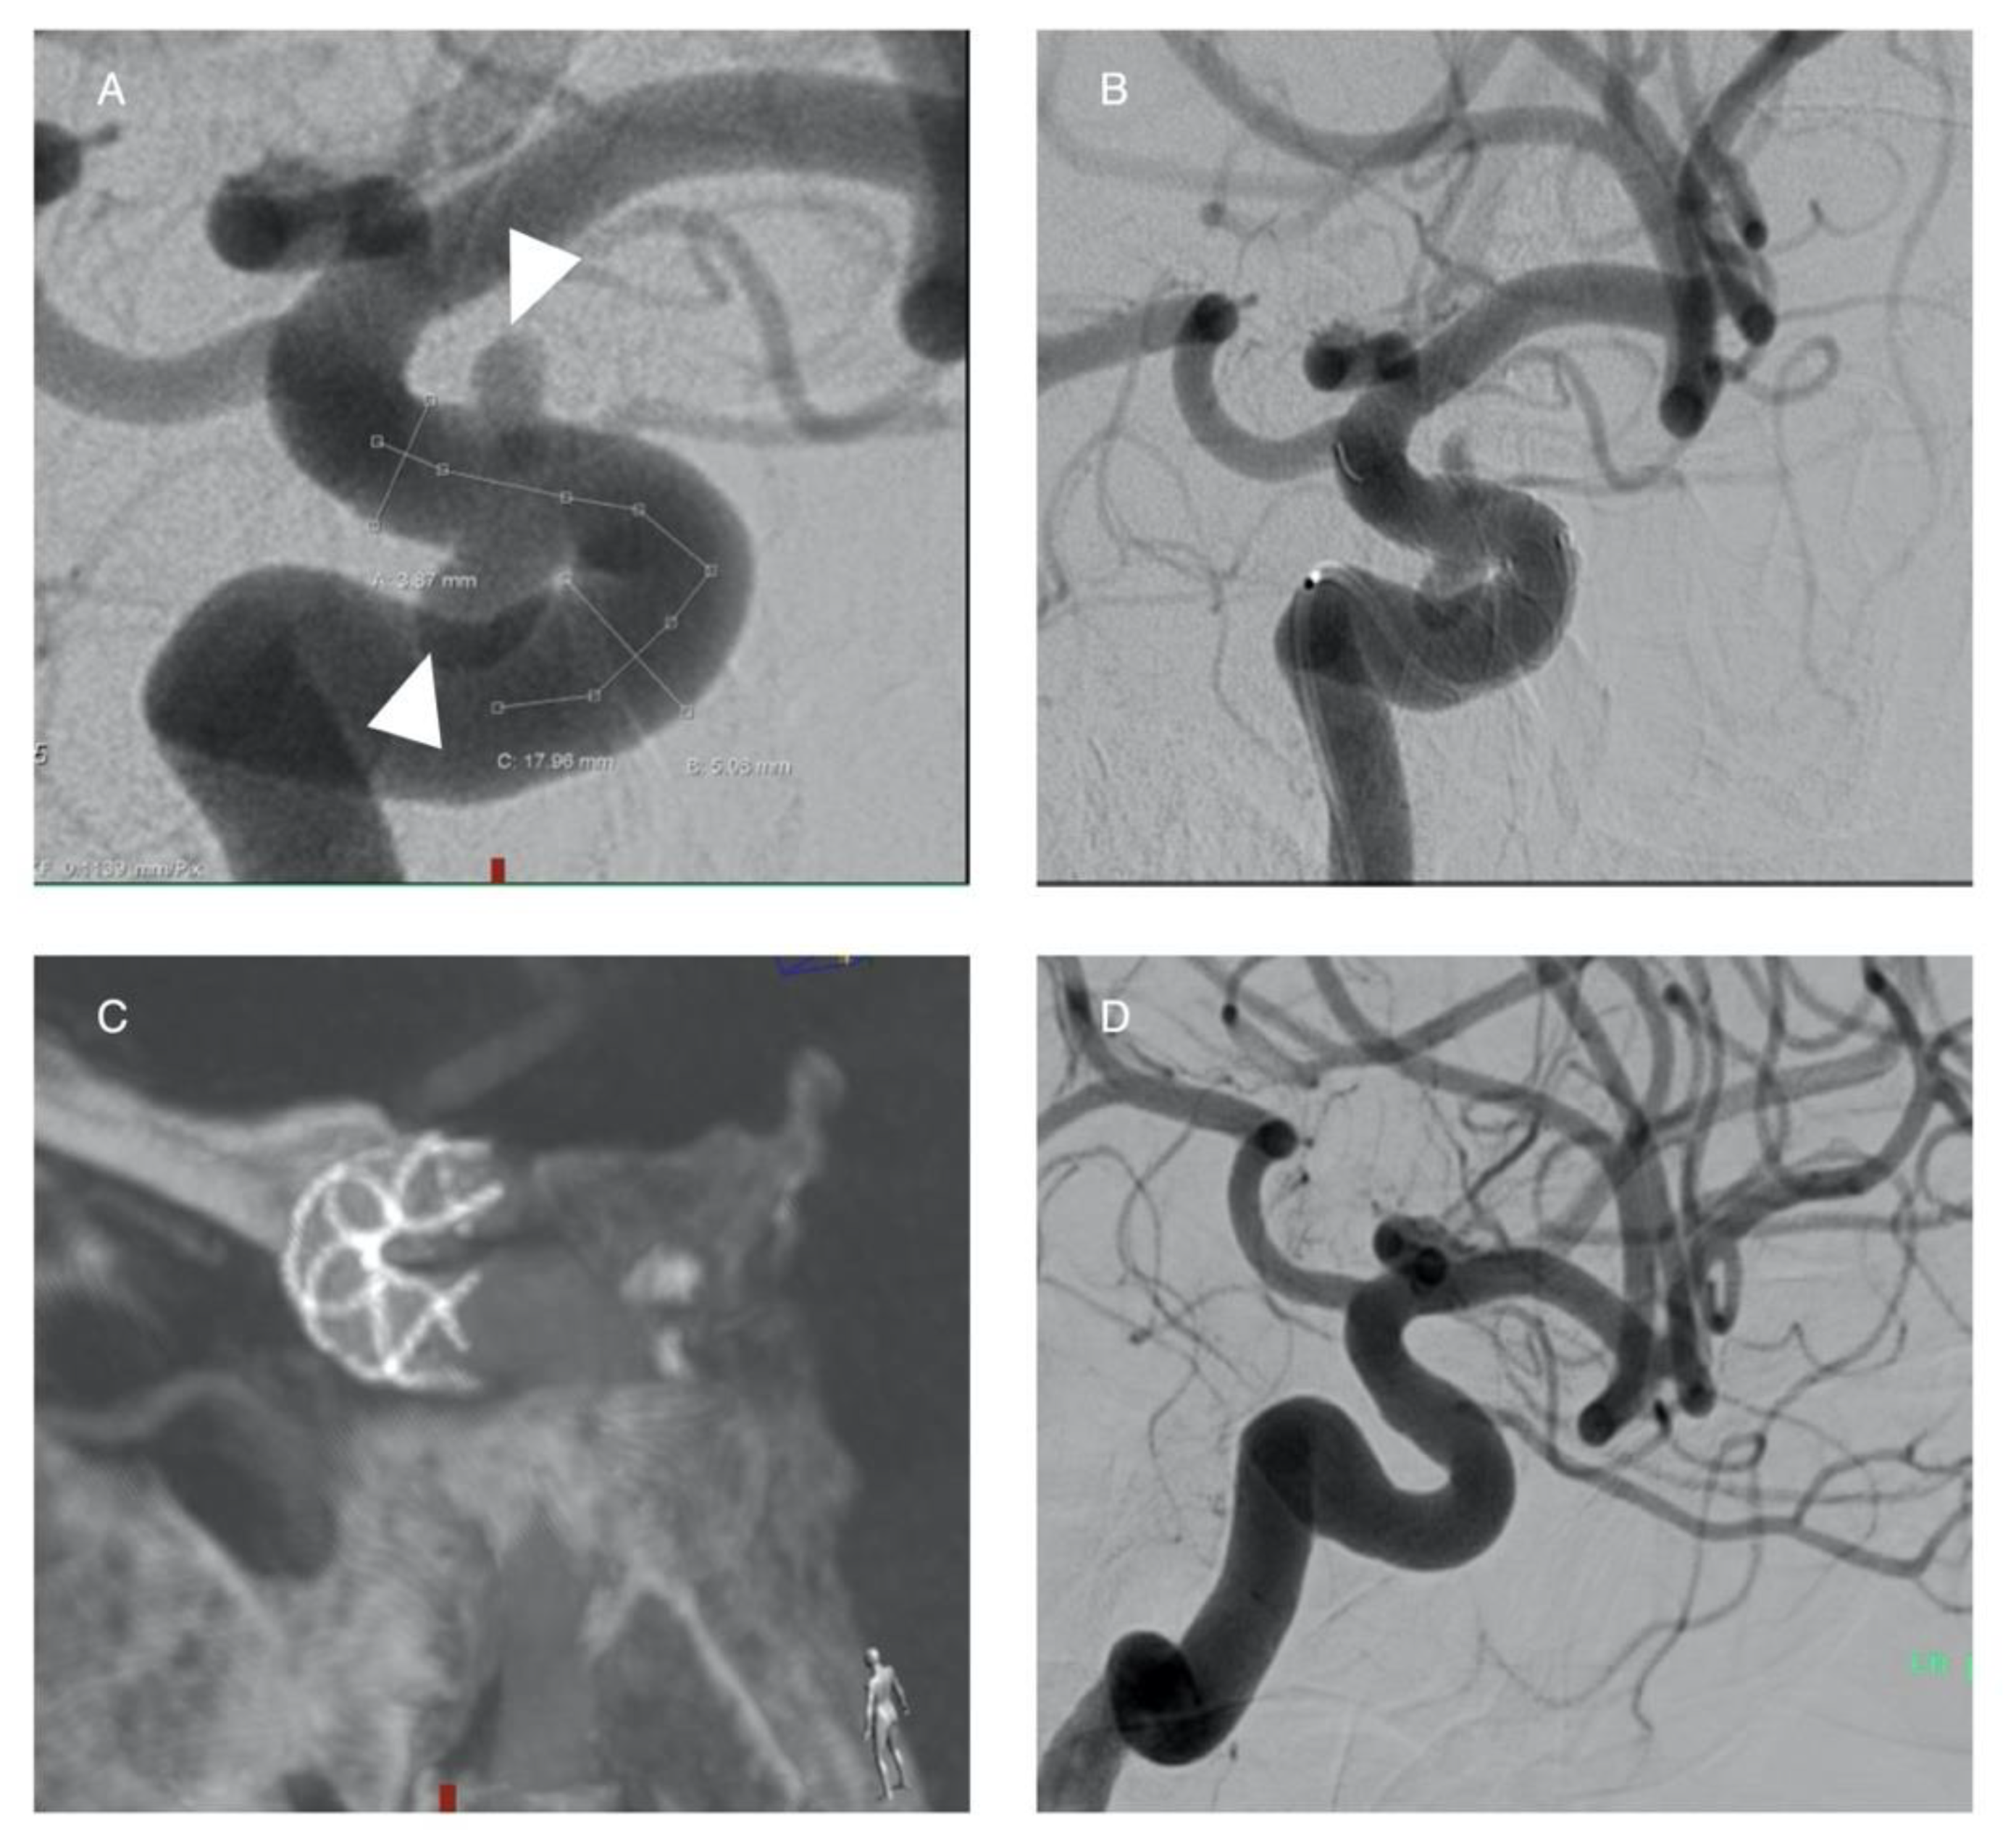 Life | Free Full-Text | Endovascular Treatment of Intracranial Aneurysms |  HTML